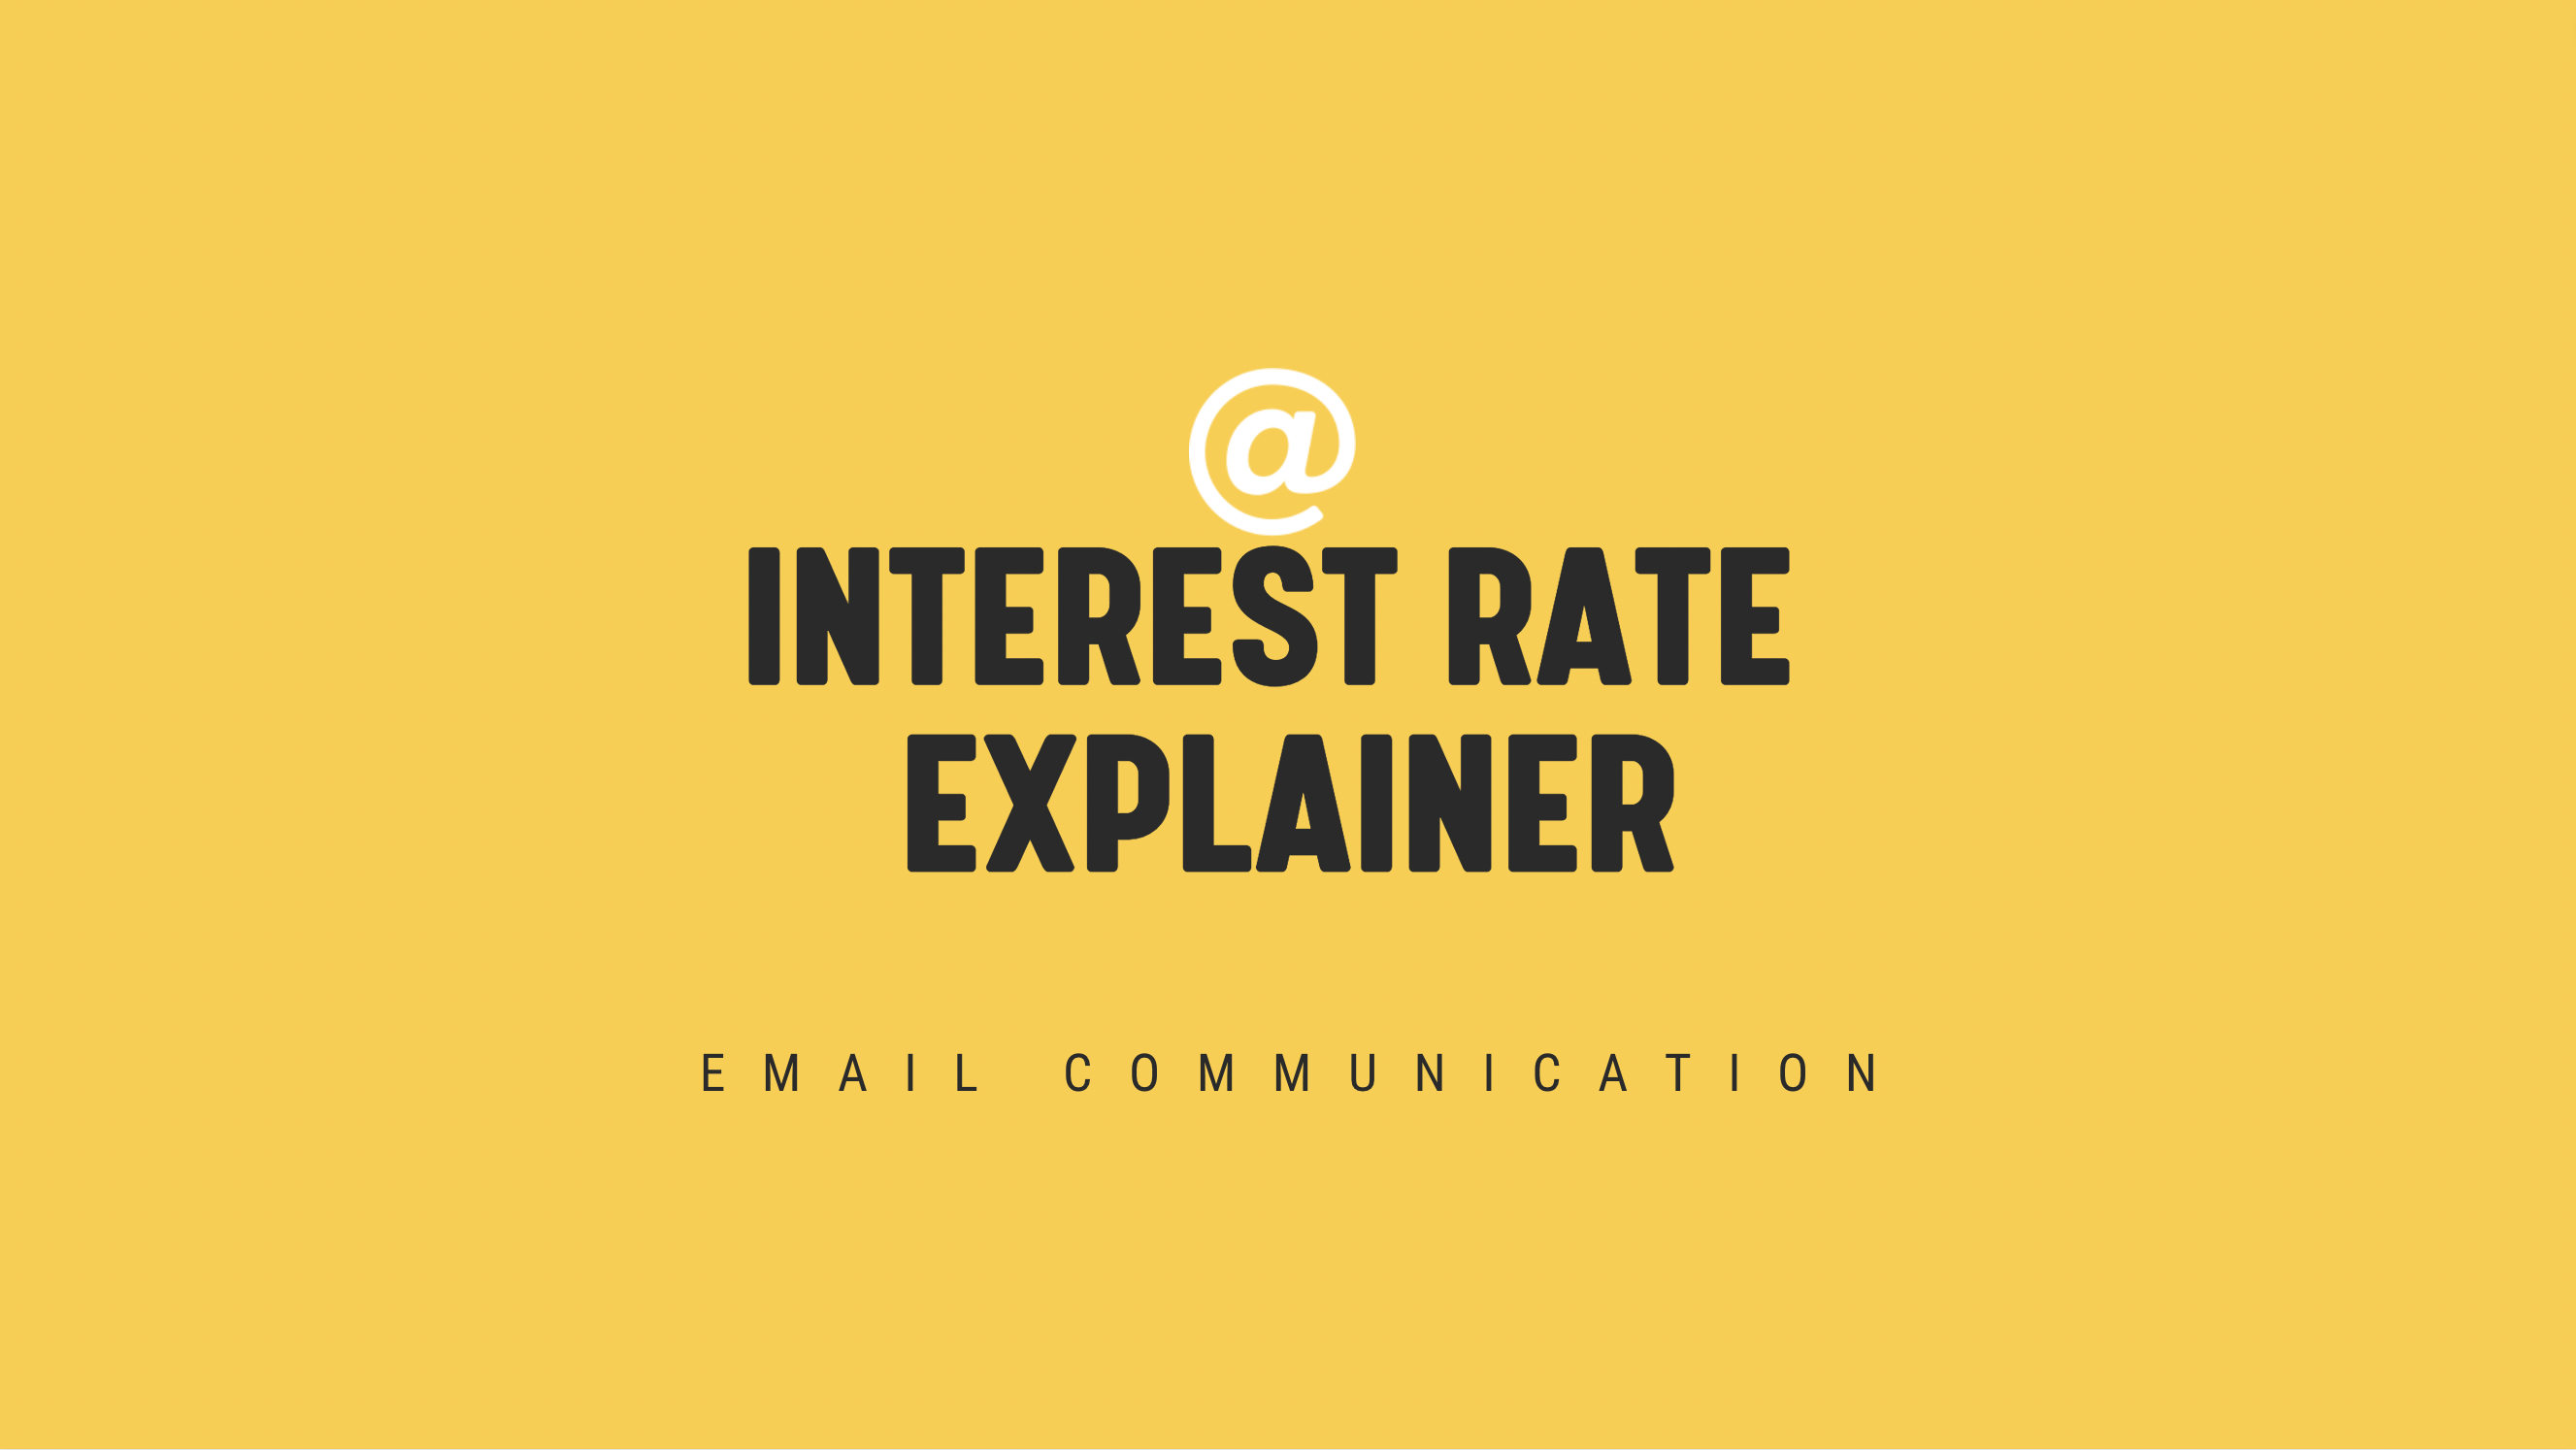 [NEW] Interest Rate Explainer - Timely Email